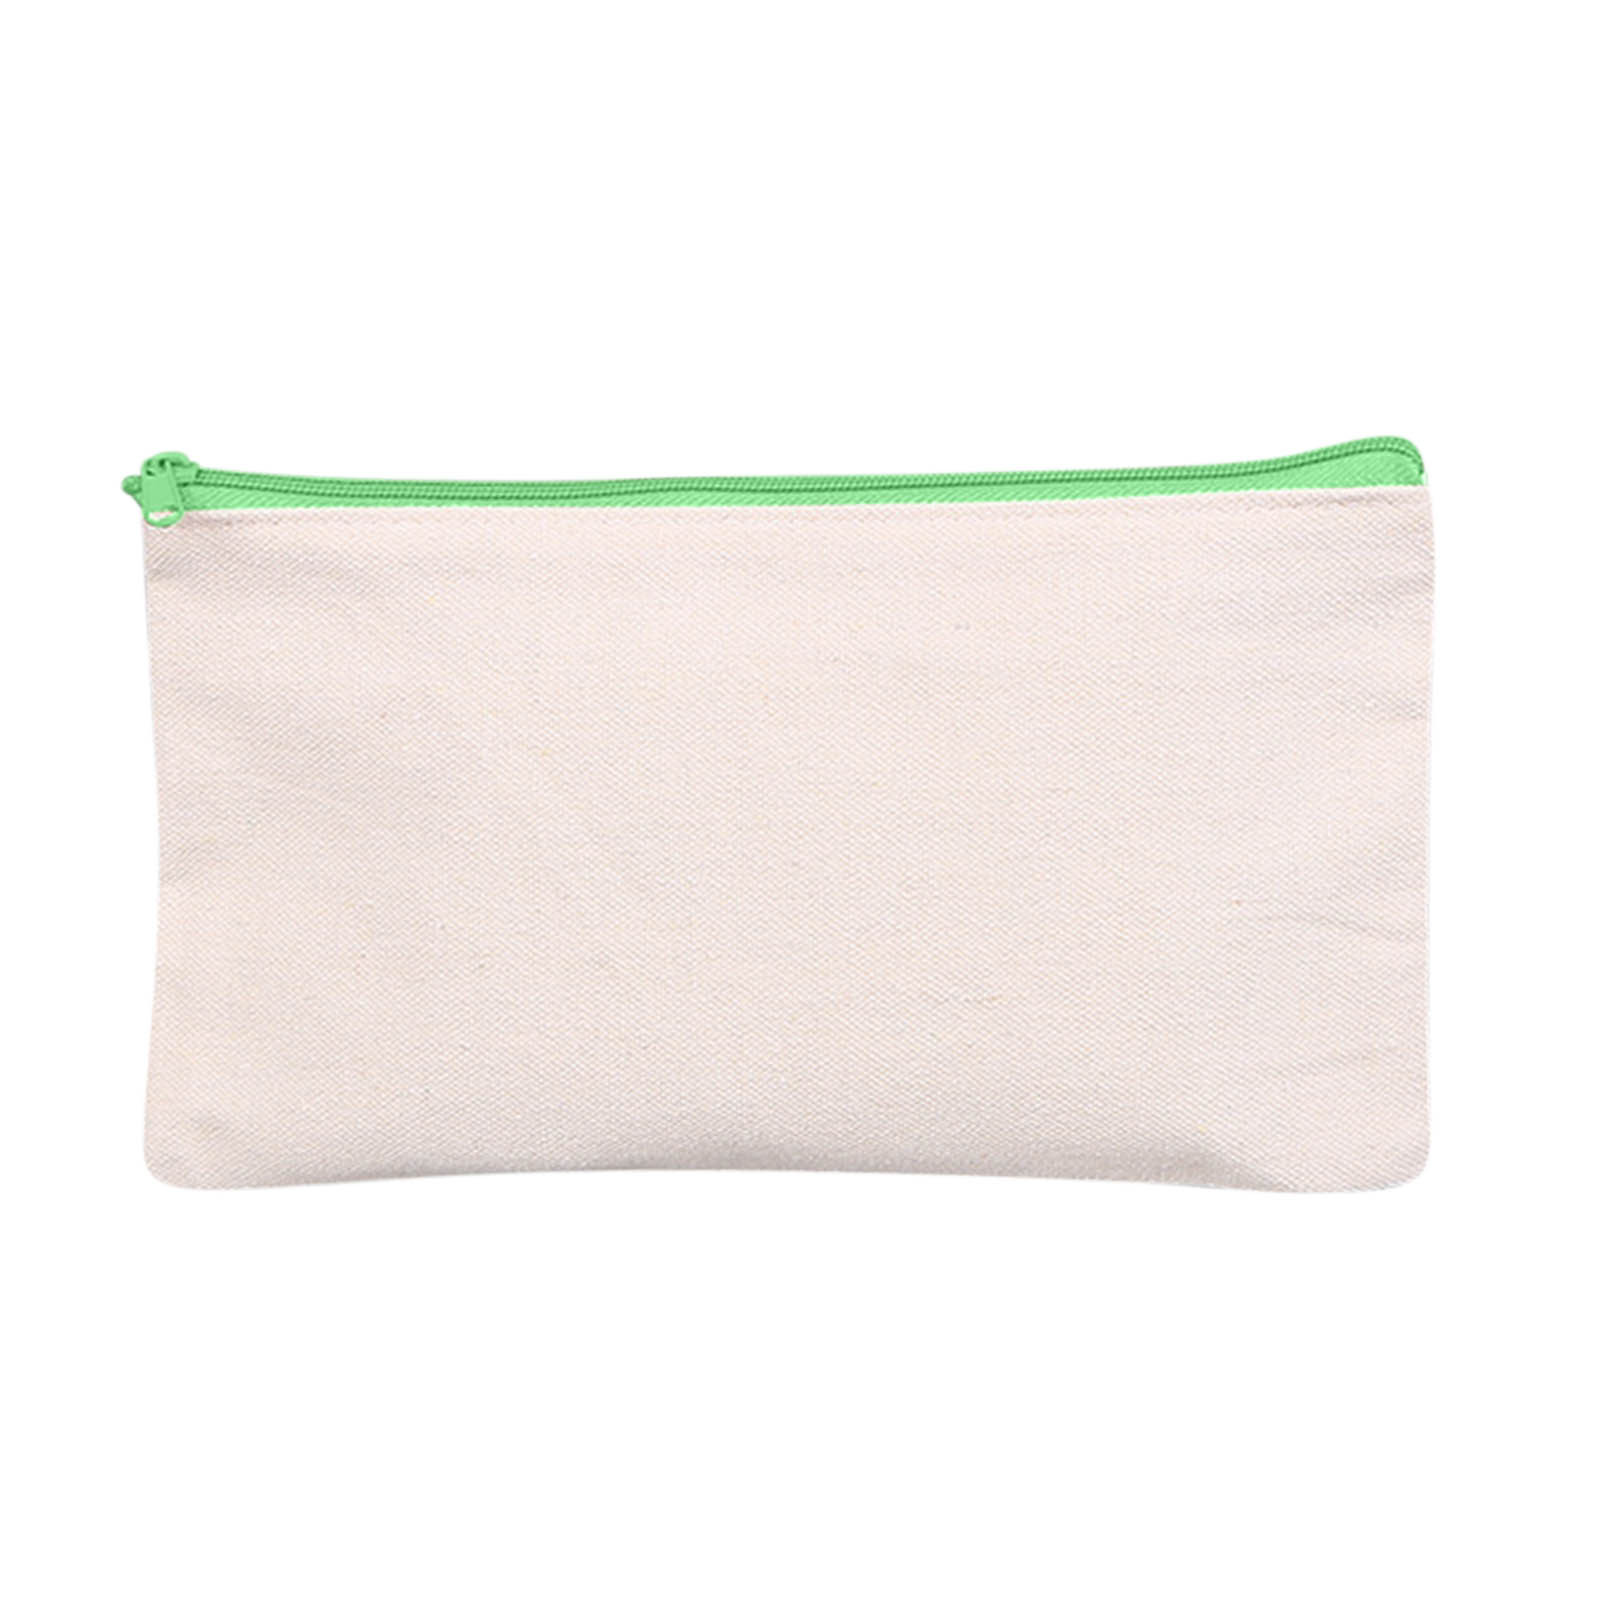 Shengxiny Canvas Pencil Pouch for School Supplies Multi-Purpose Travel Bags Pen Pencil Case Clearance Small Zipper Pouch, Size: One size, Green